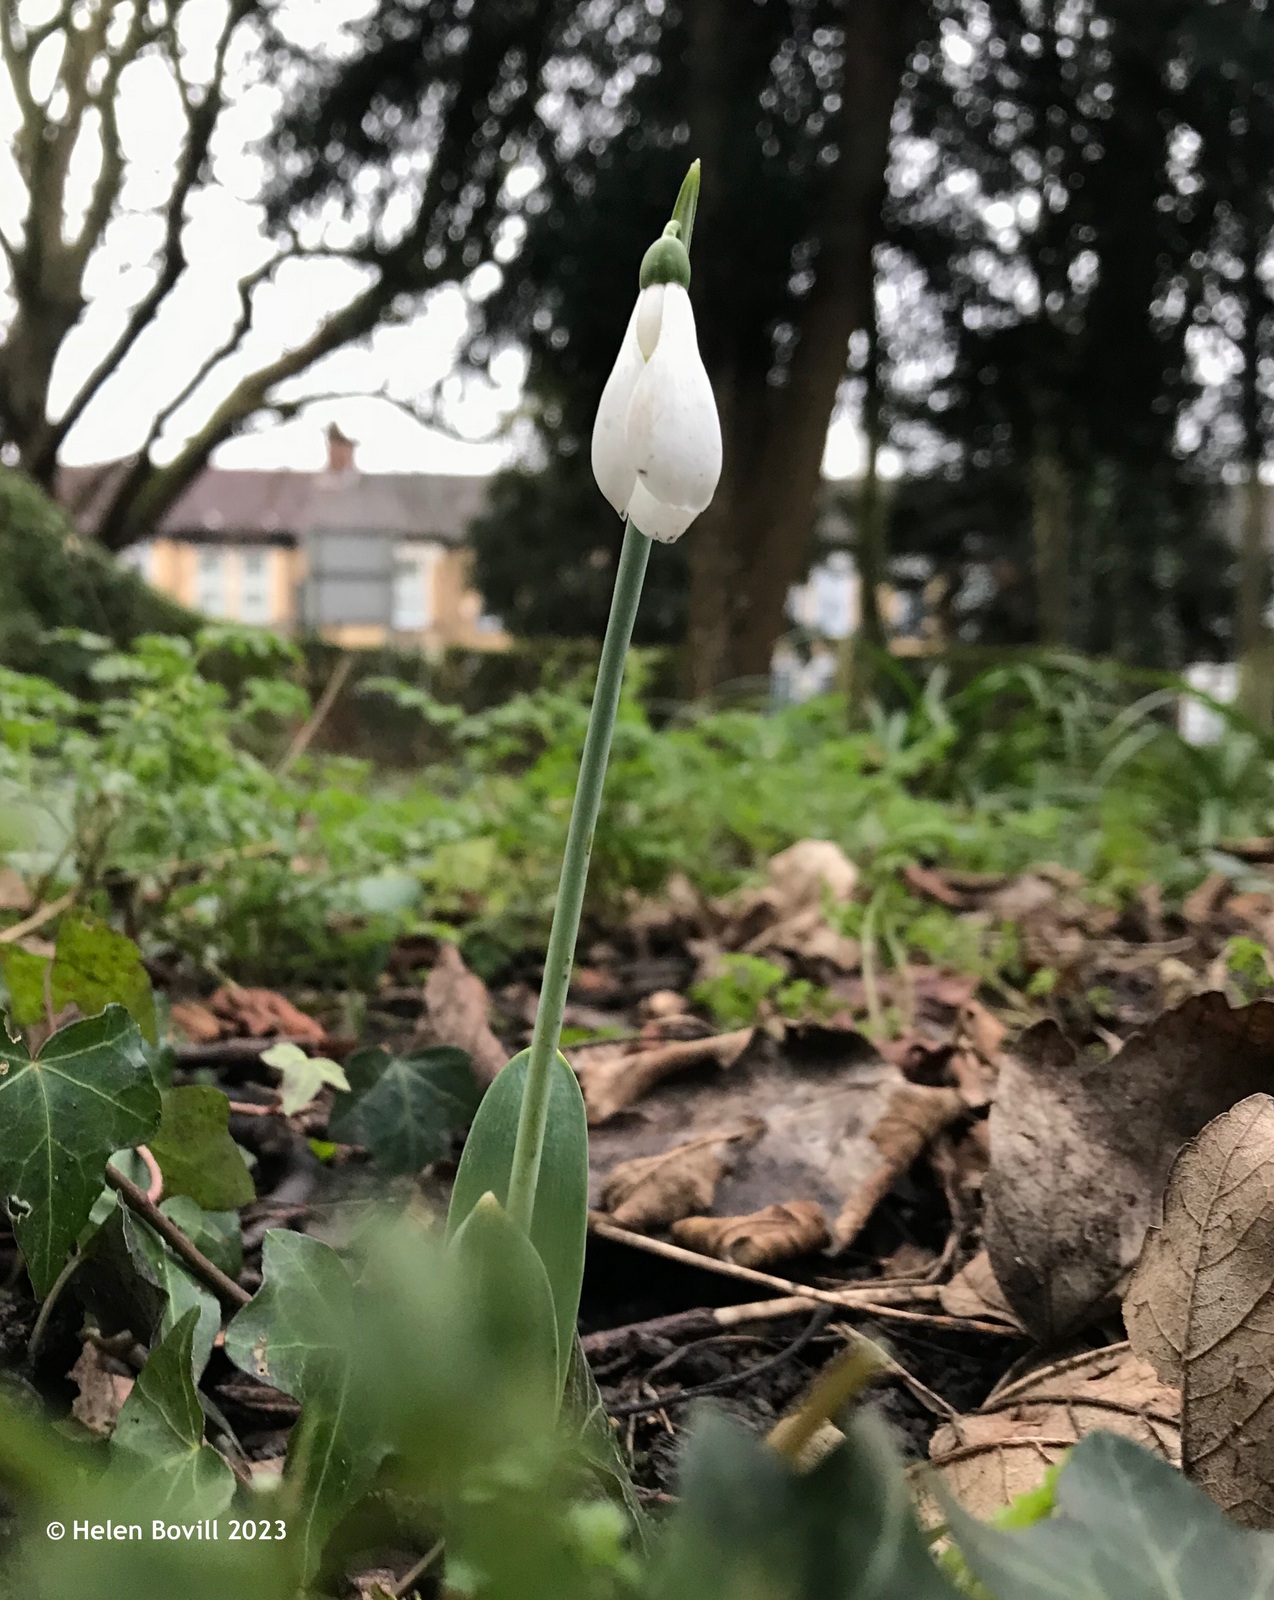 A lone snowdrop in the Quaker burial ground section of the cemetery, with the houses on Spring Bank West in the background